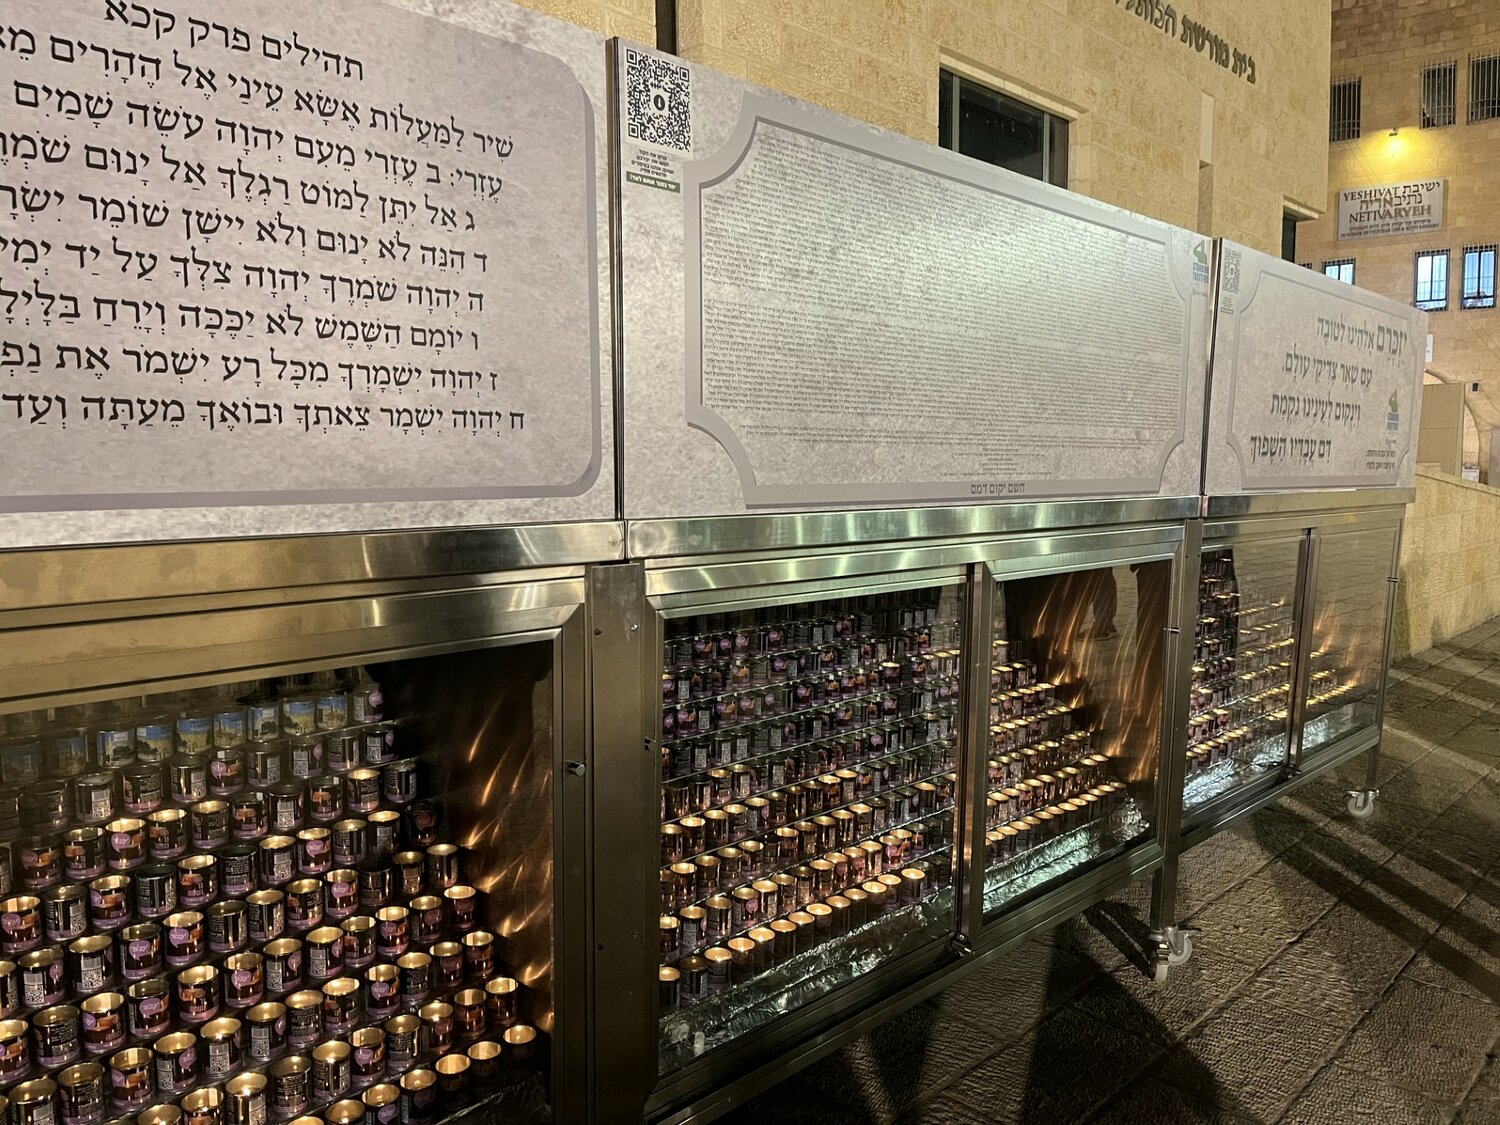 A new memorial in the Western Wall Plaza lists the names of the 1,200 people murdered by Hamas.